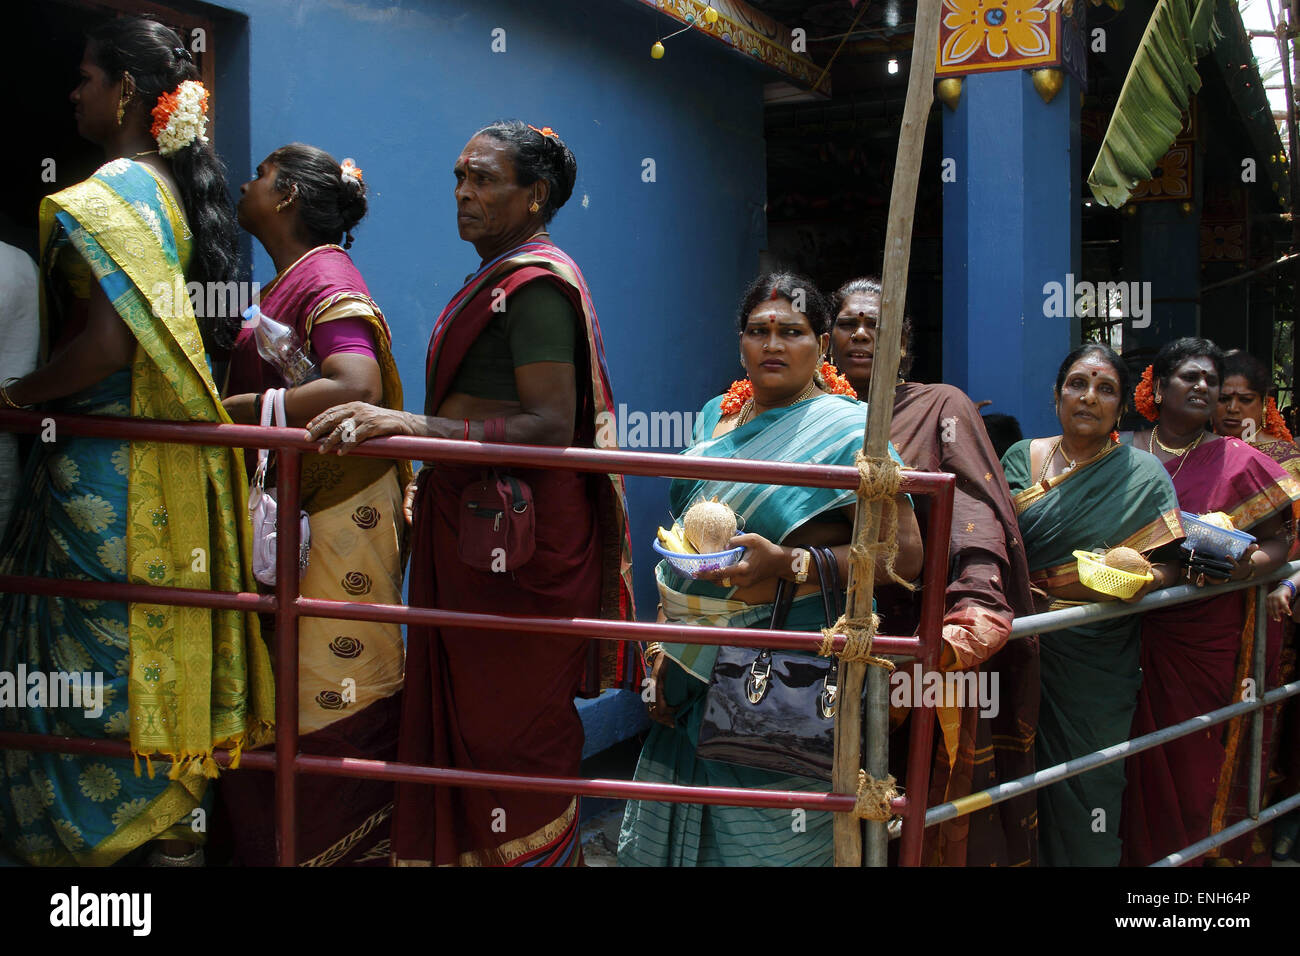 Villupuram, India. 05th May, 2015. Transgenders queue-up at Koothandavar temple to get married with Lord Aravan in Koovagam festival on Tuesday. Transgenders gathered for 18 days in the month of April-May to observe the festival in Koovagam village, Villupuram district of Tamilnadu. © Shashi Sharma/Pacific Press/Alamy Live News Stock Photo